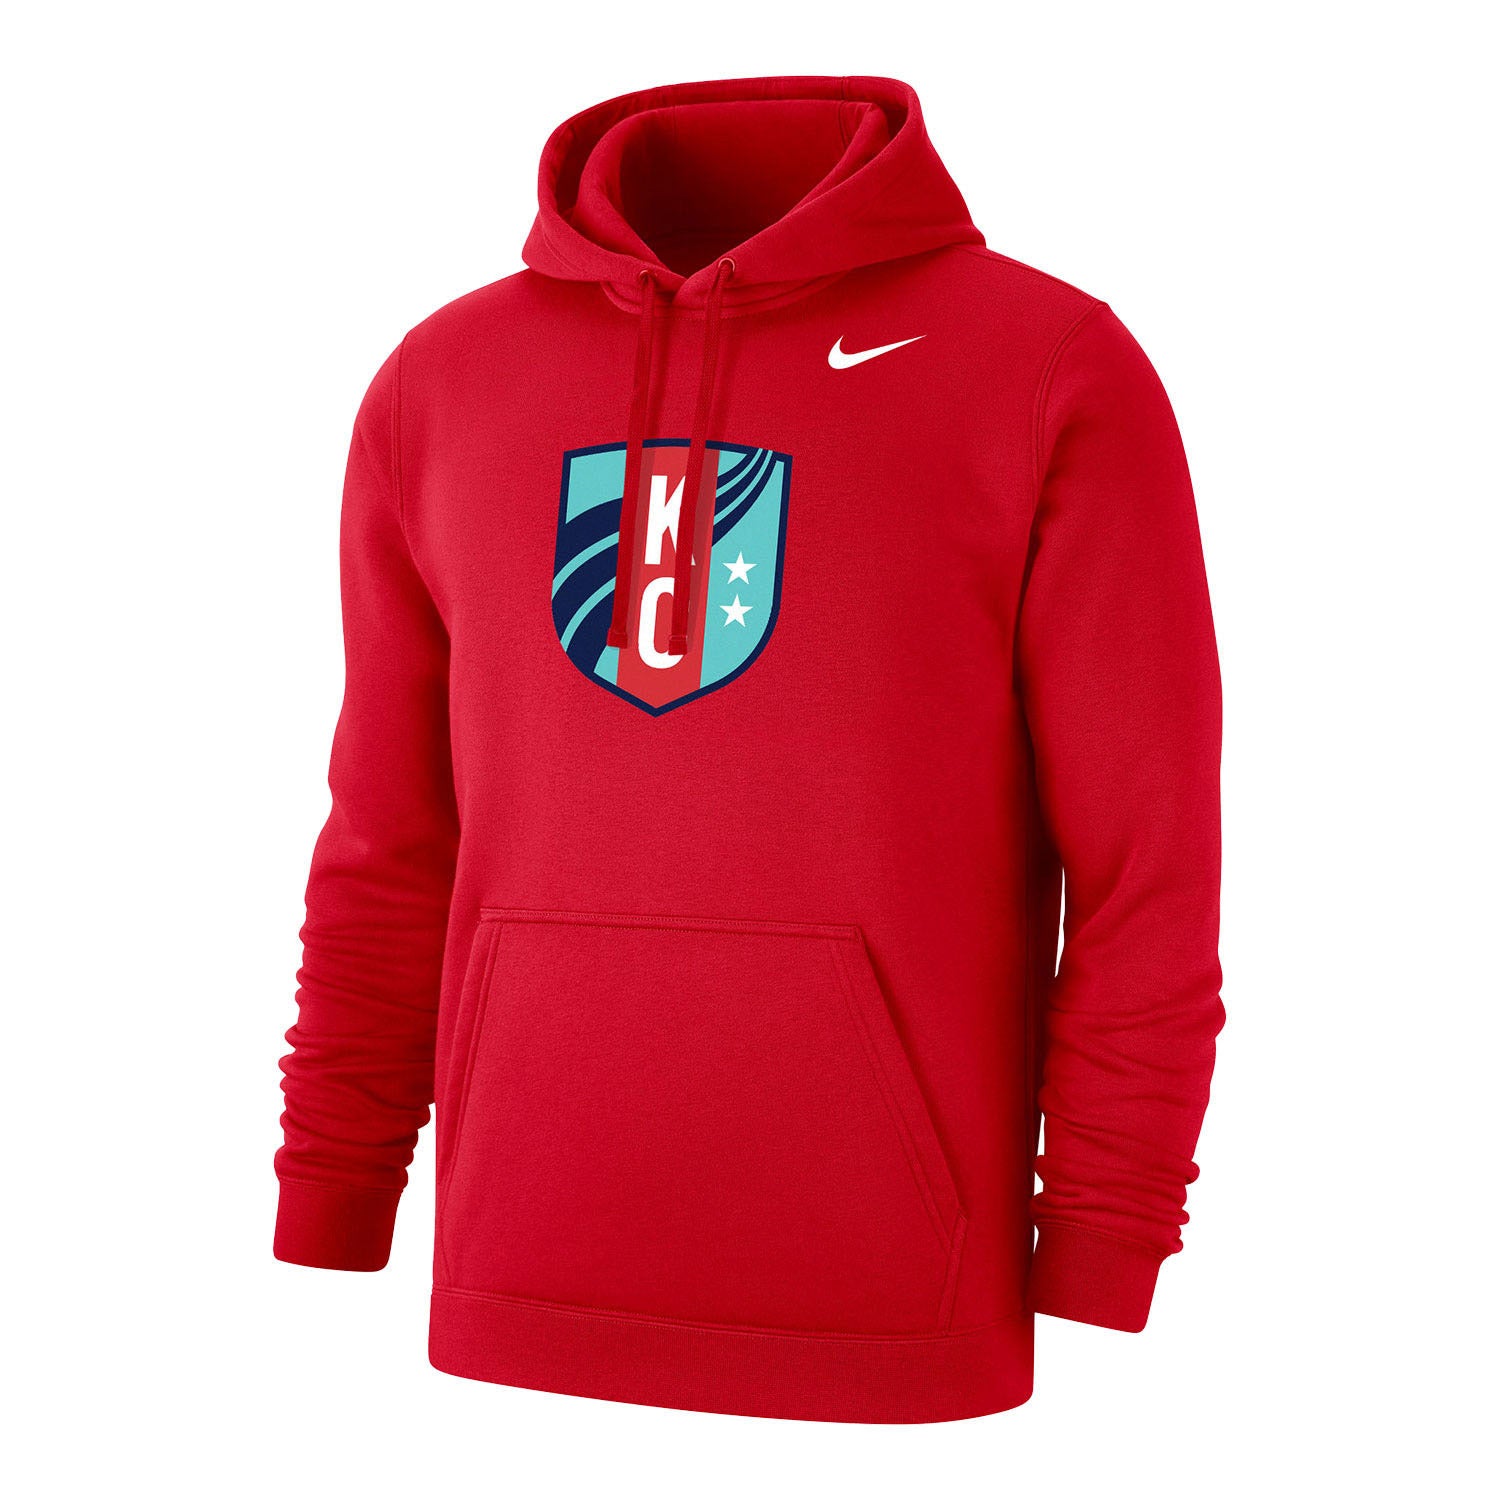 Unisex Nike KC Current Crest Red Hoodie